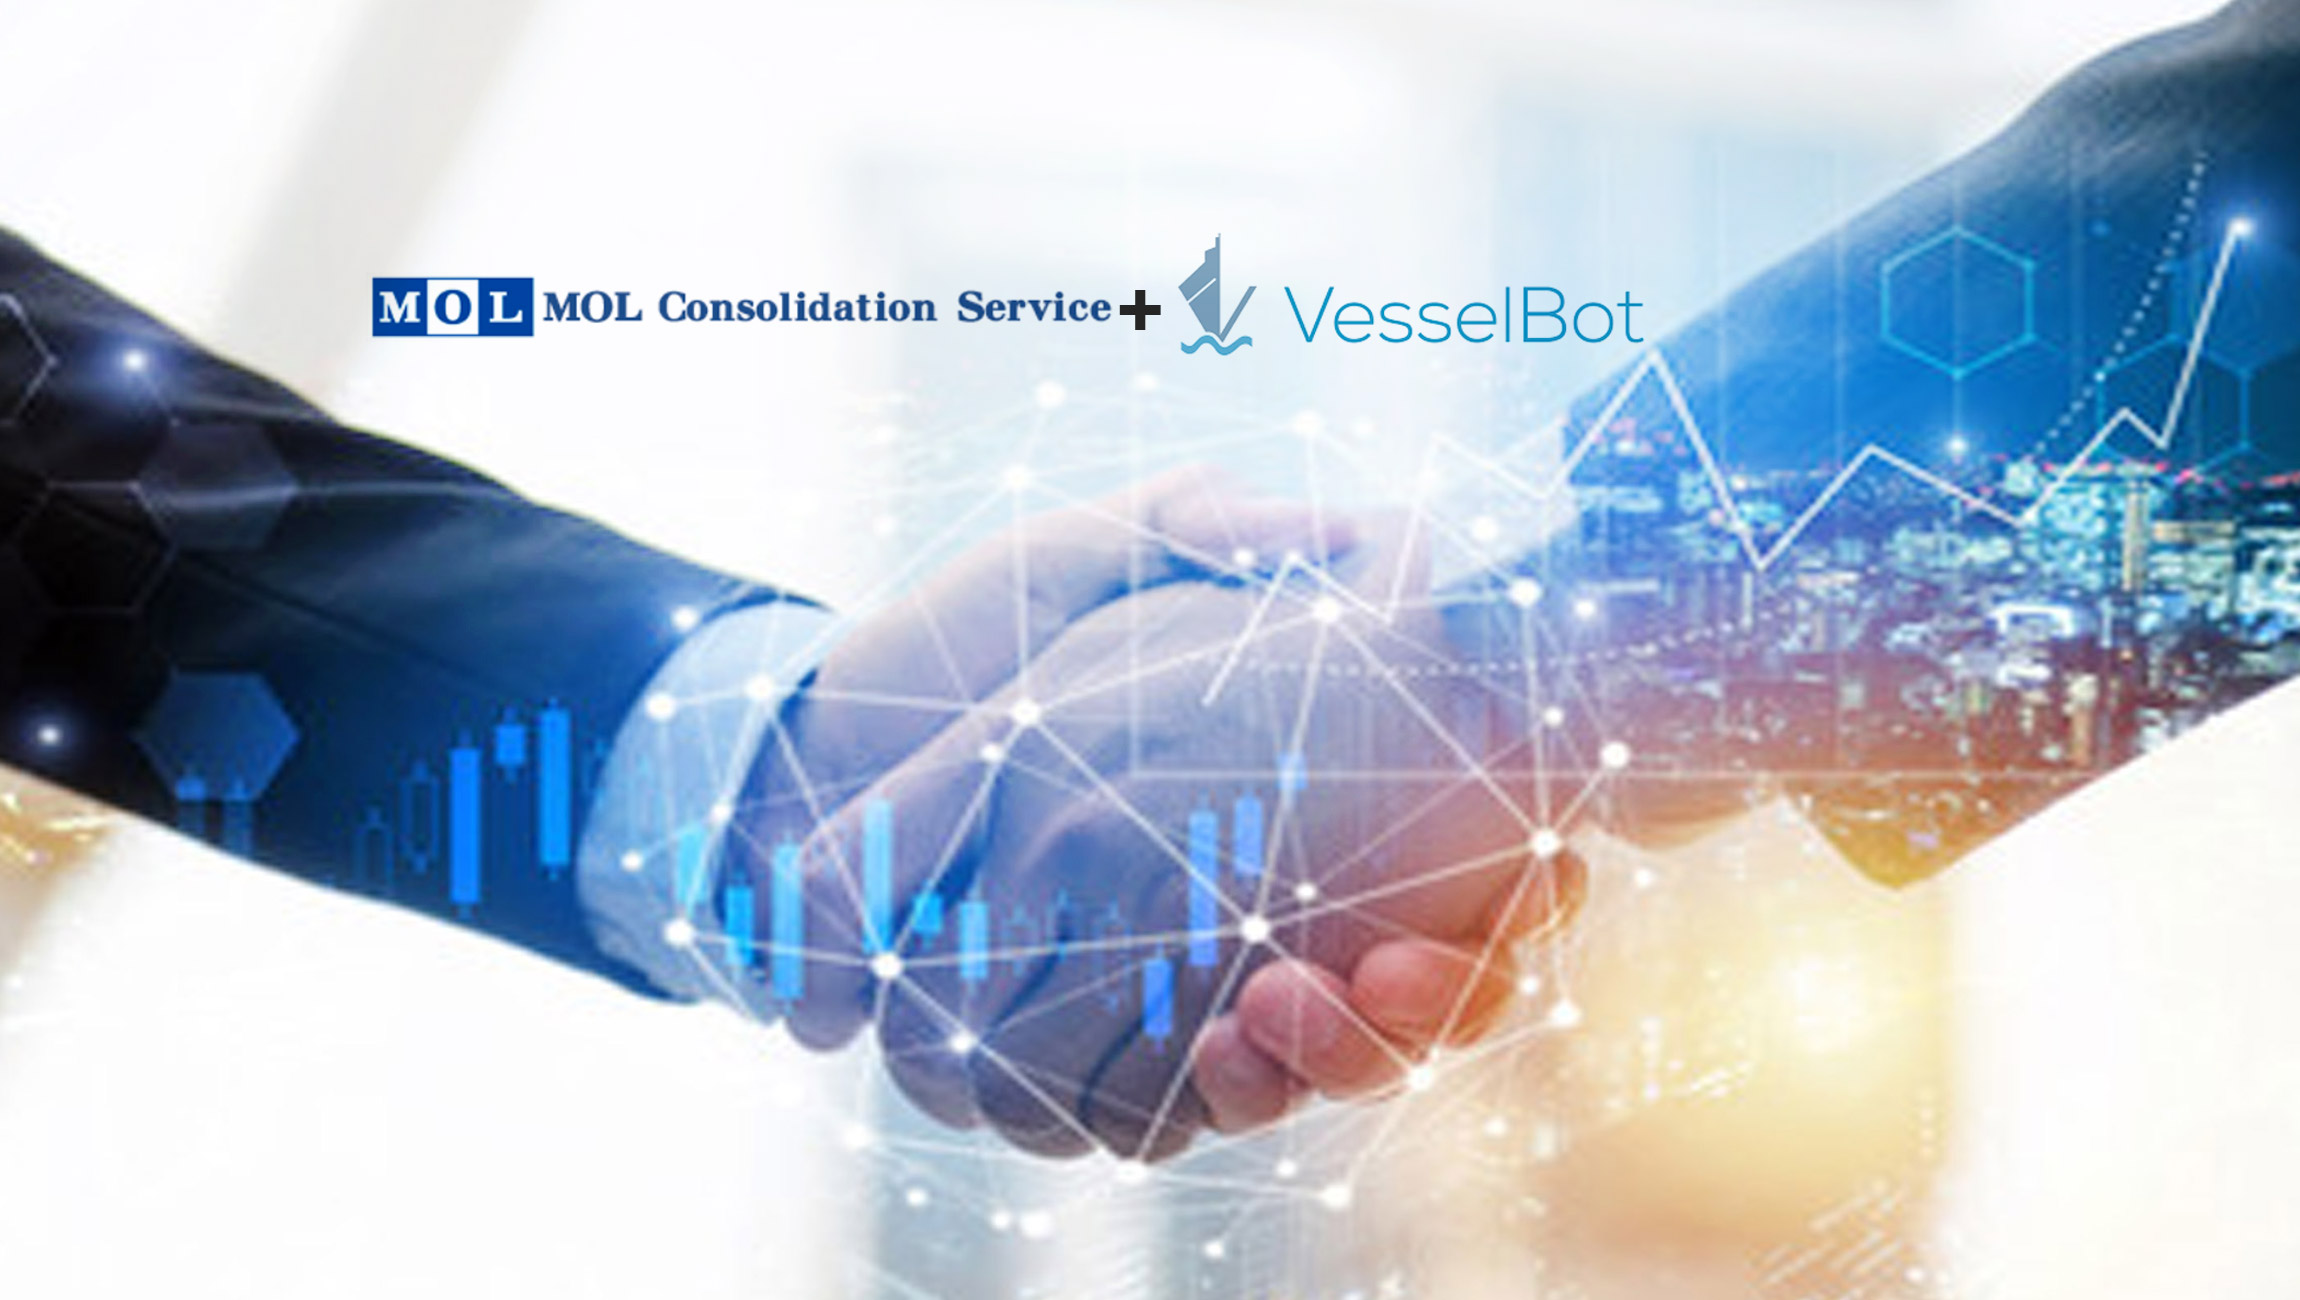 MOL Consolidation Service (MCS) And VesselBot Establish A Partnership To Reduce GHG Emissions In The Supply Chain